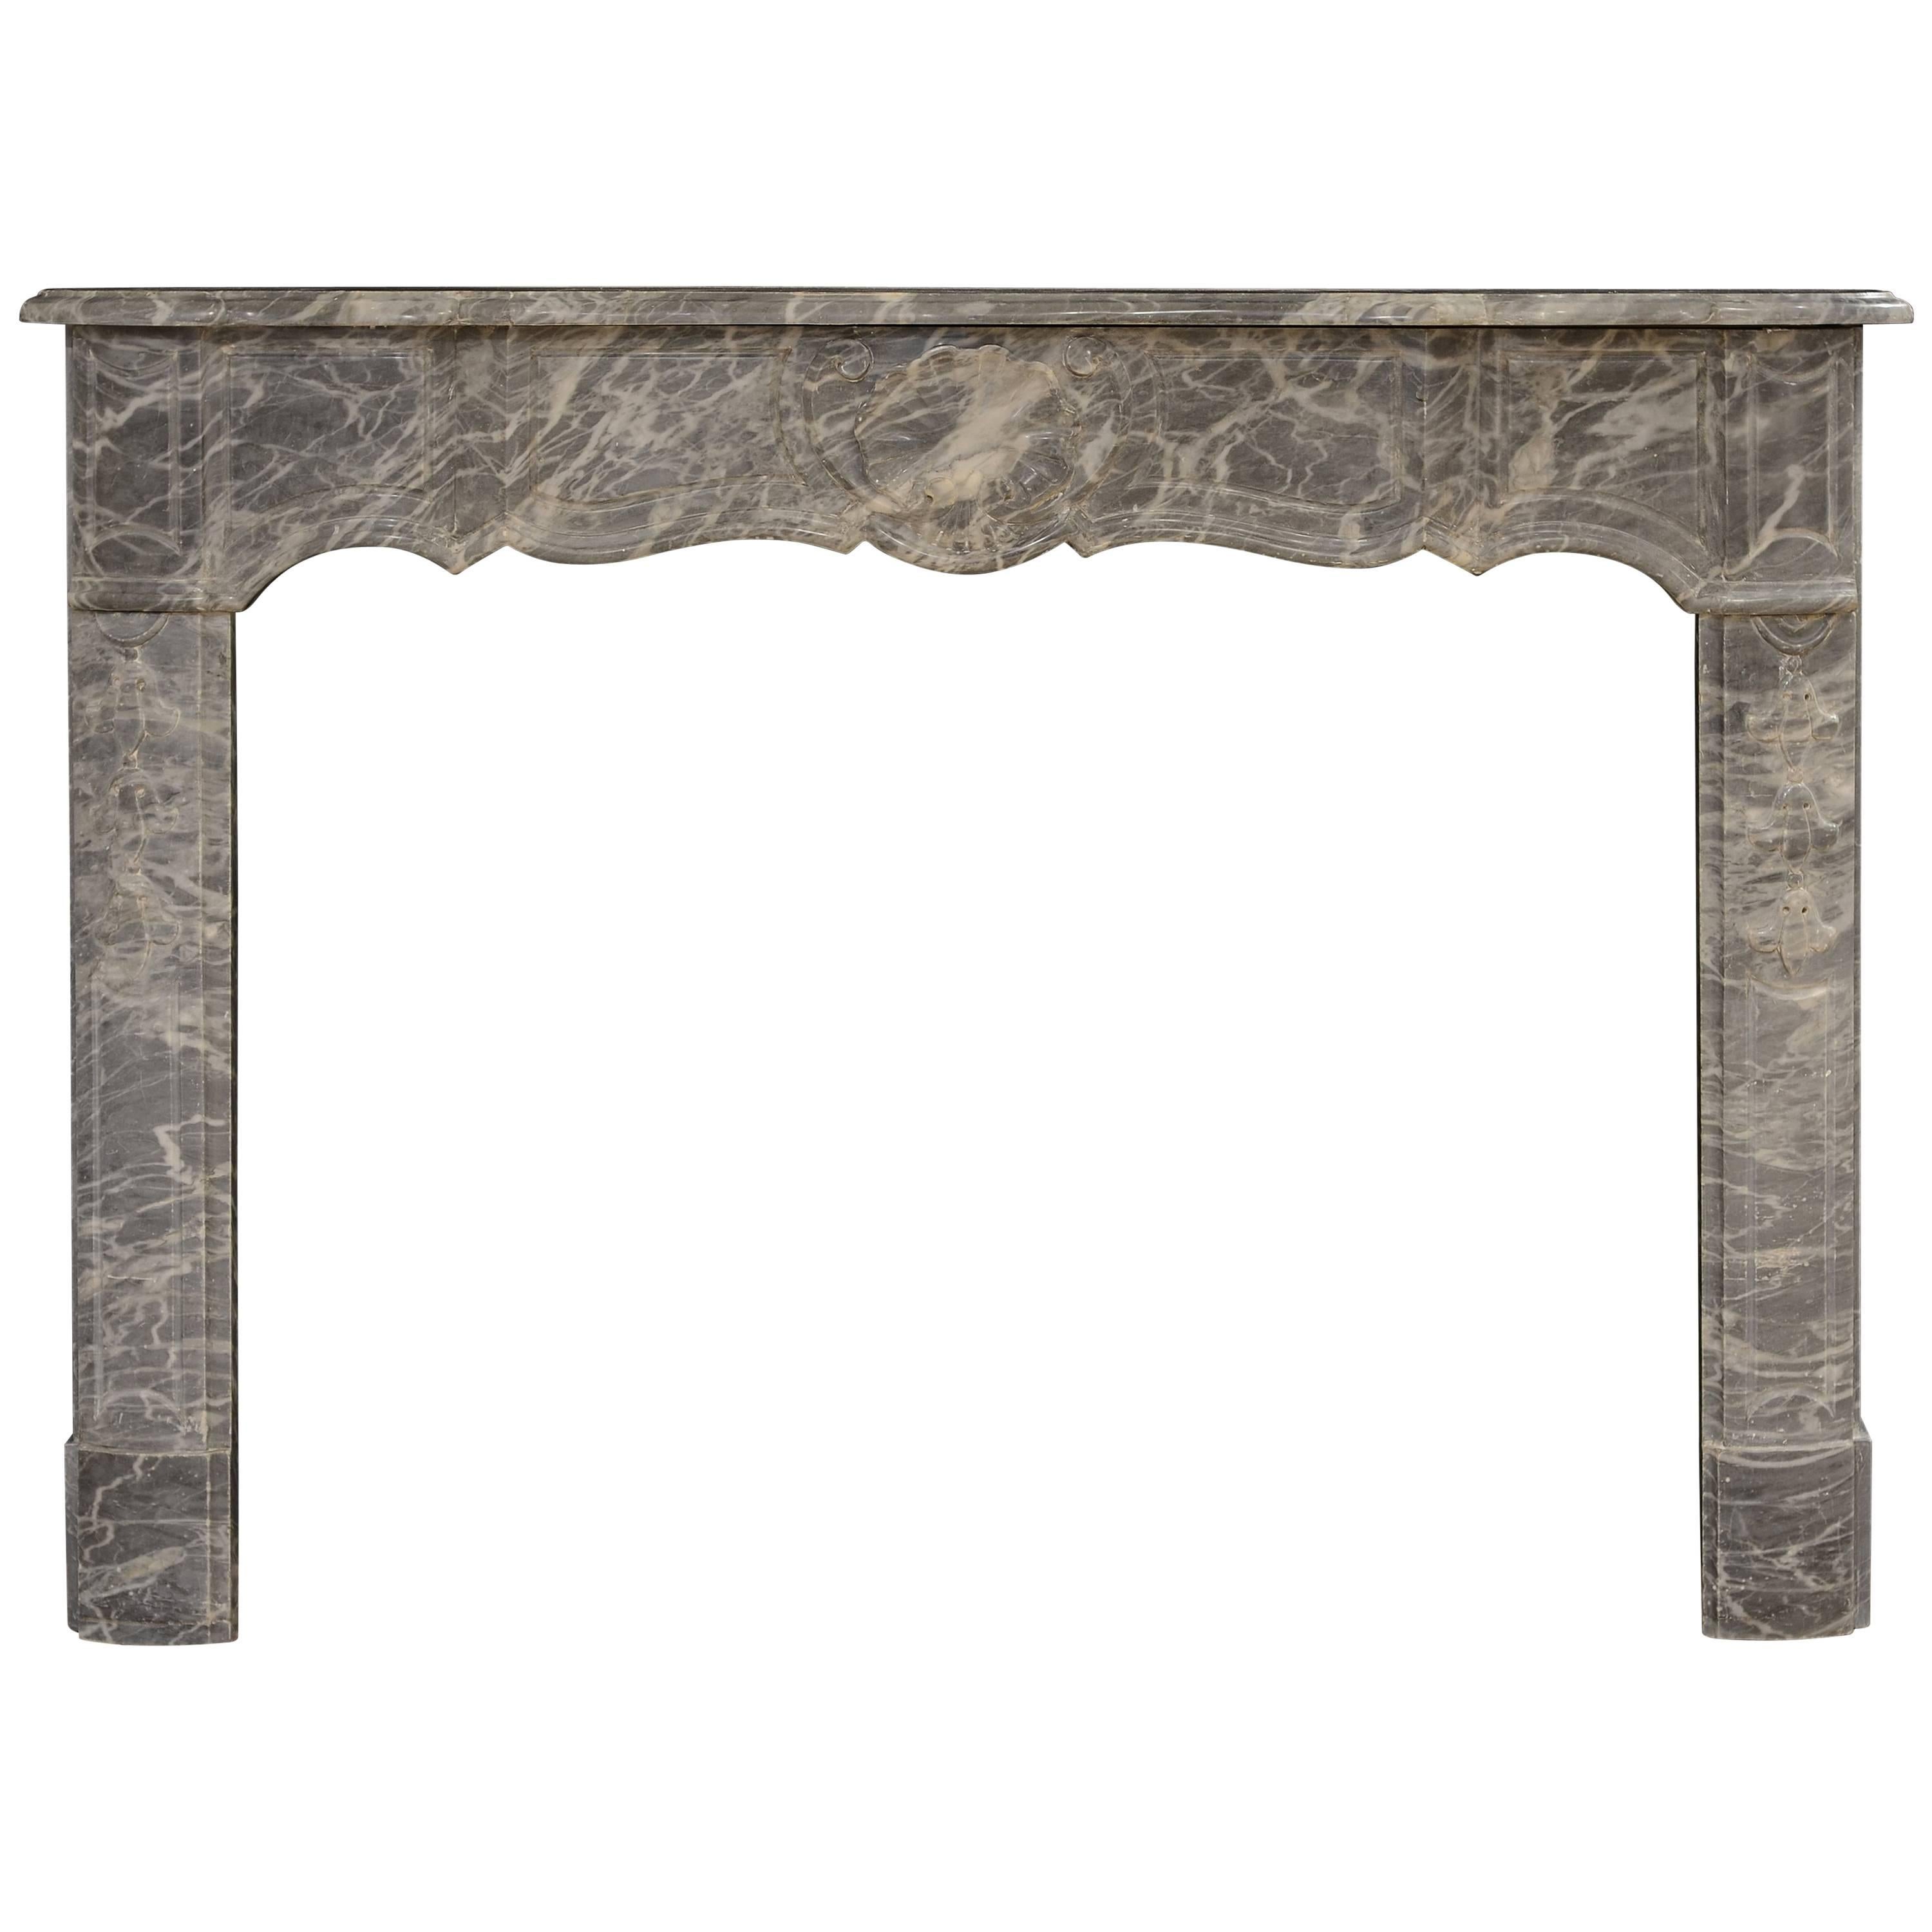 French Régence Fireplace Mantel in Grey Marble